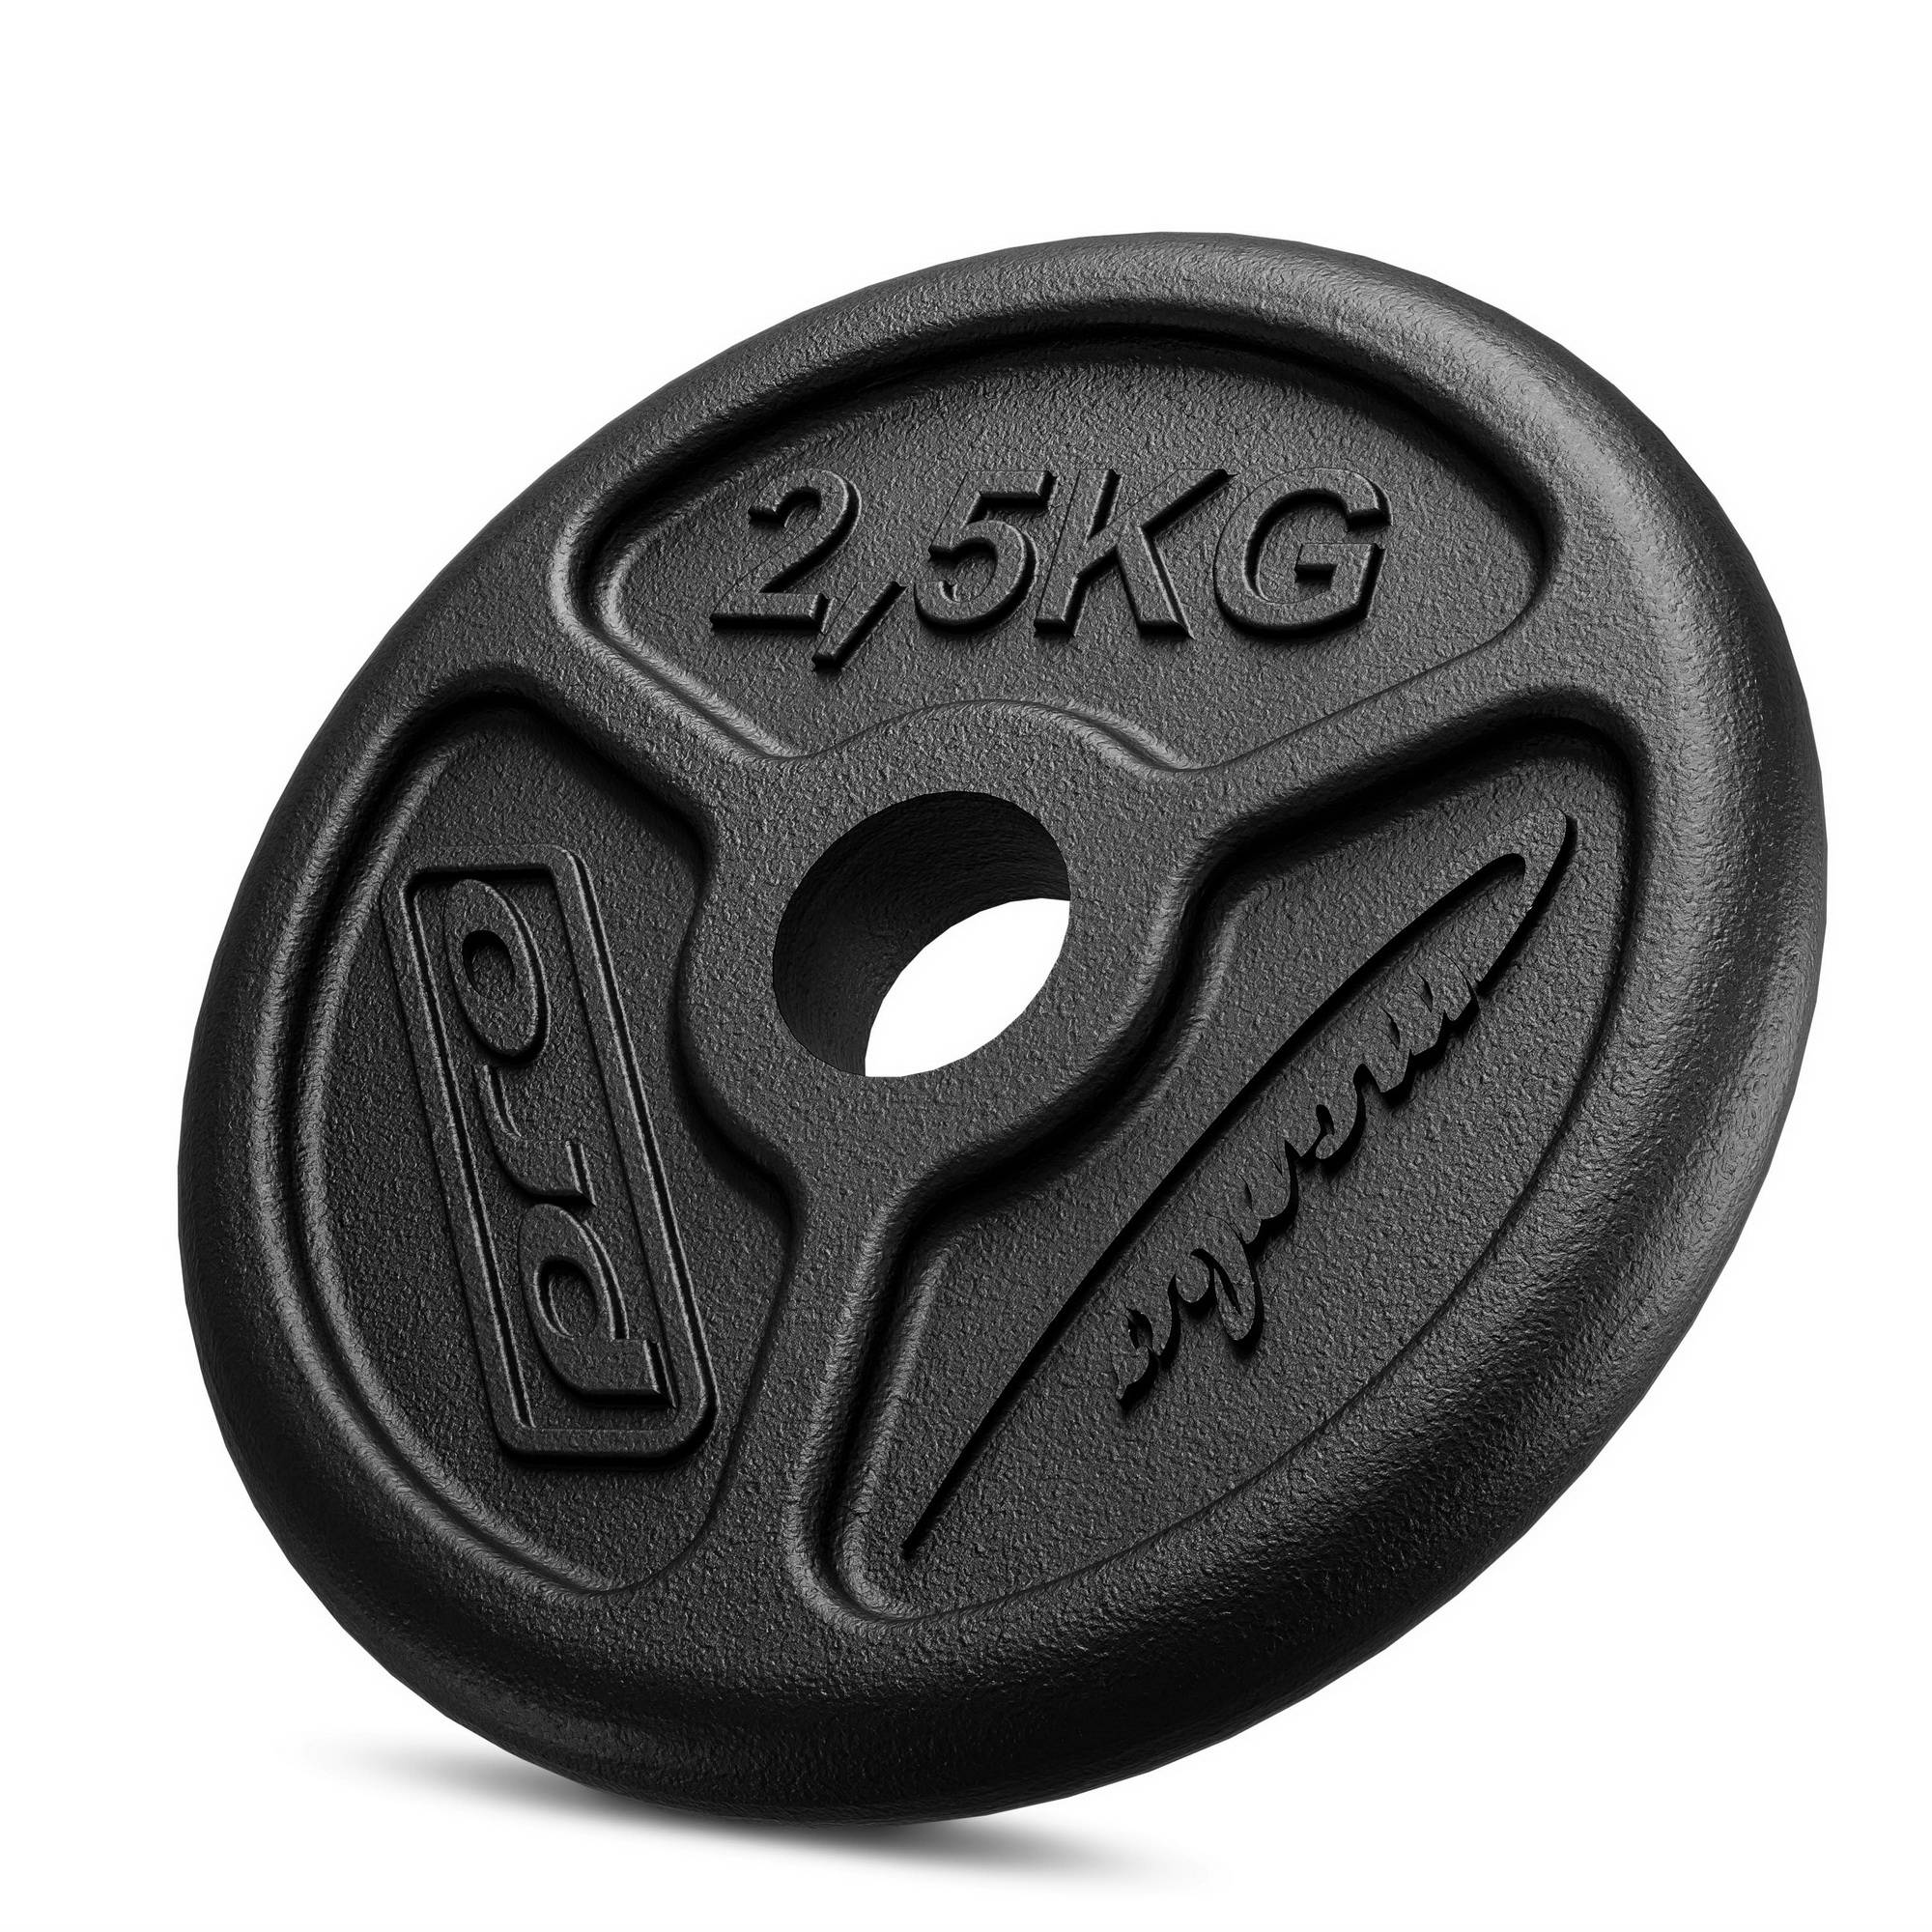 Standard iron discs slim 2,5 kg with ø31 mm bore MW-O2,5-slim - Marbo Sport  2.5 kg | Bars and Weight Plates \\ Weight plates \\ Standard weight plates  Black Week 2023 Cyber Week 2023